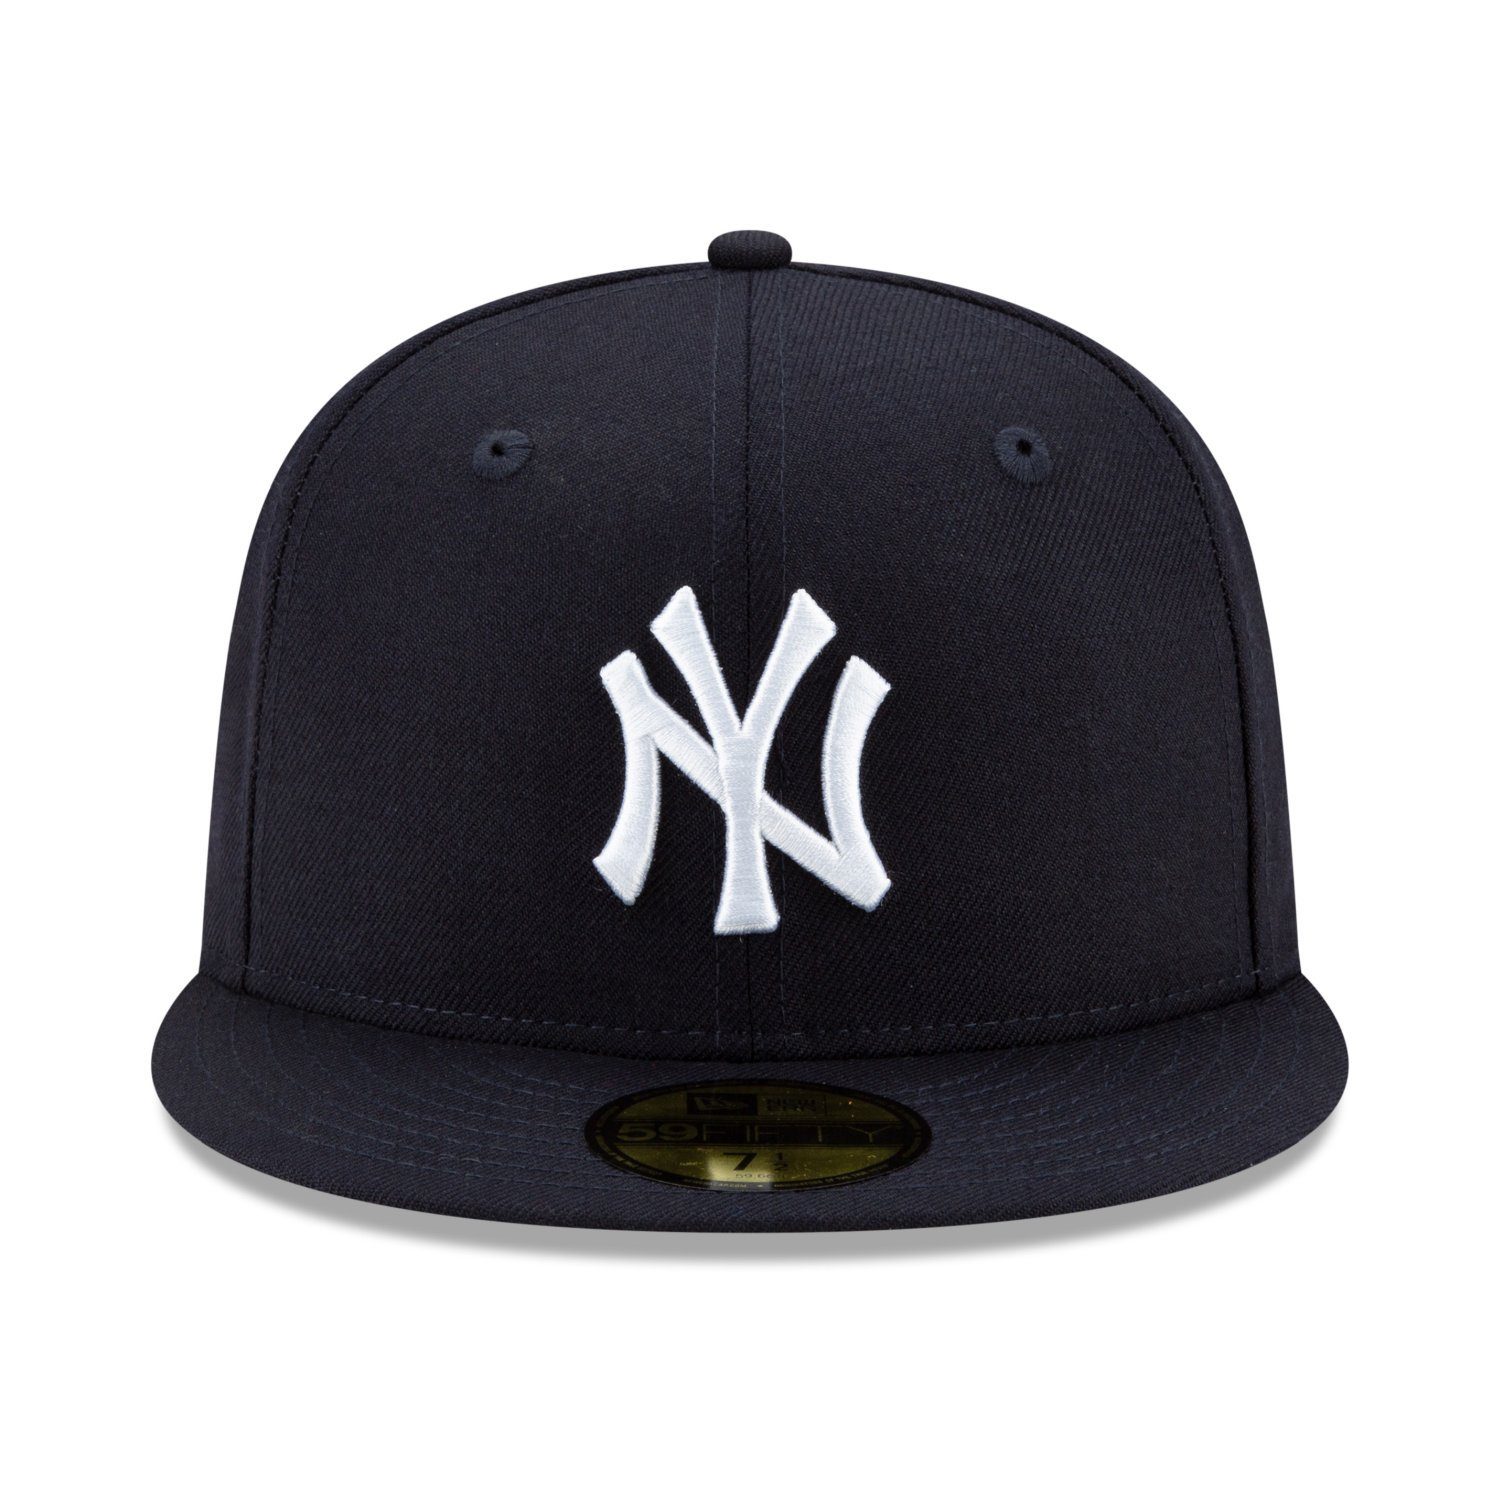 Fitted Cap 59Fifty Yankees New New LIFESTYLE Era York